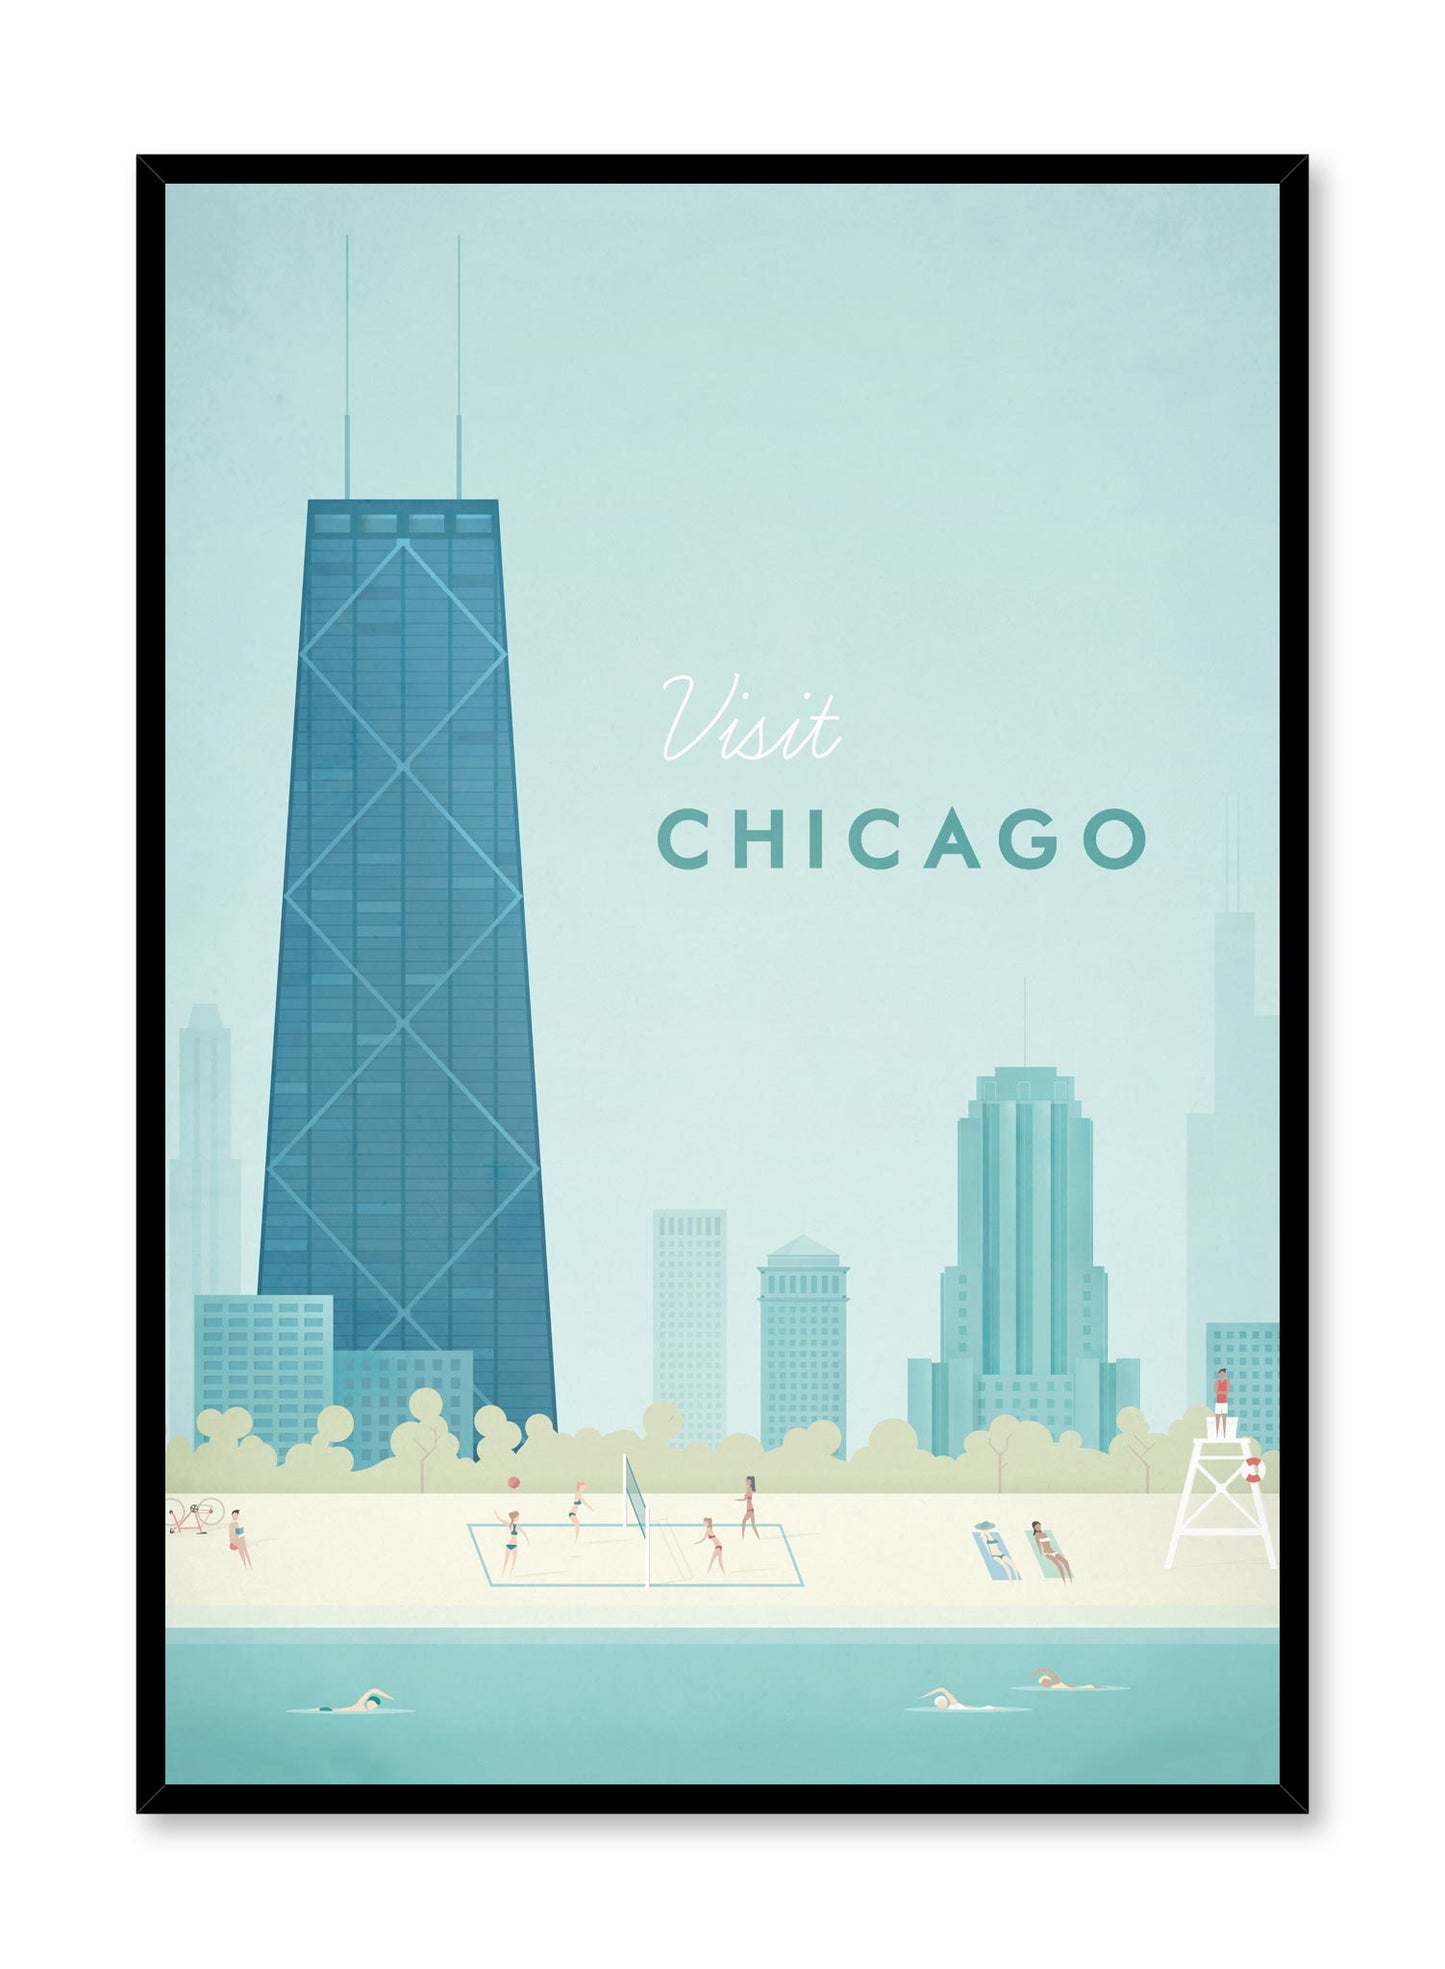 Modern minimalist travel poster by Opposite Wall with illustration of Chicago